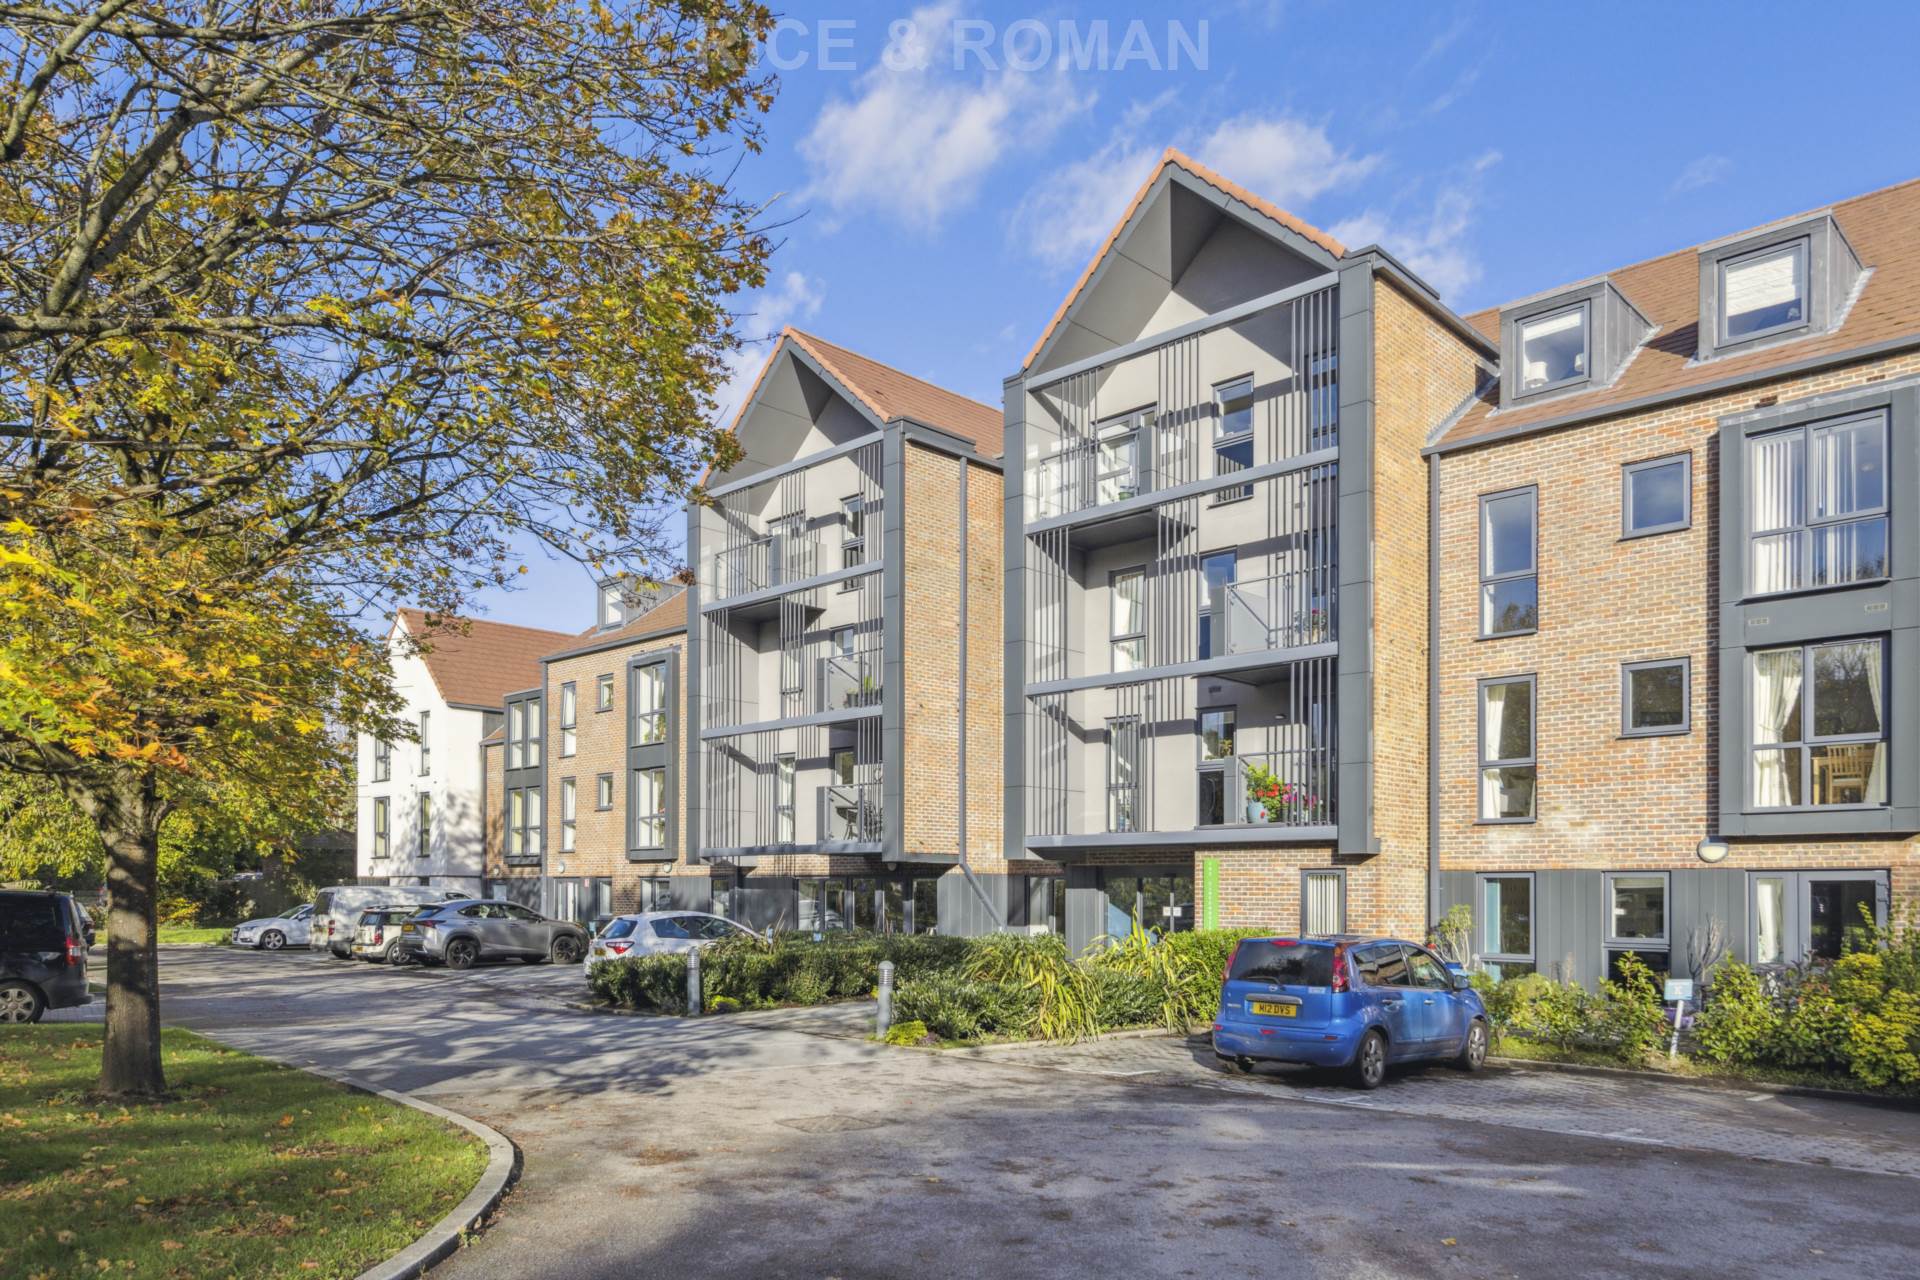 1 bed Retirement for rent in Guildford. From Rice & Roman